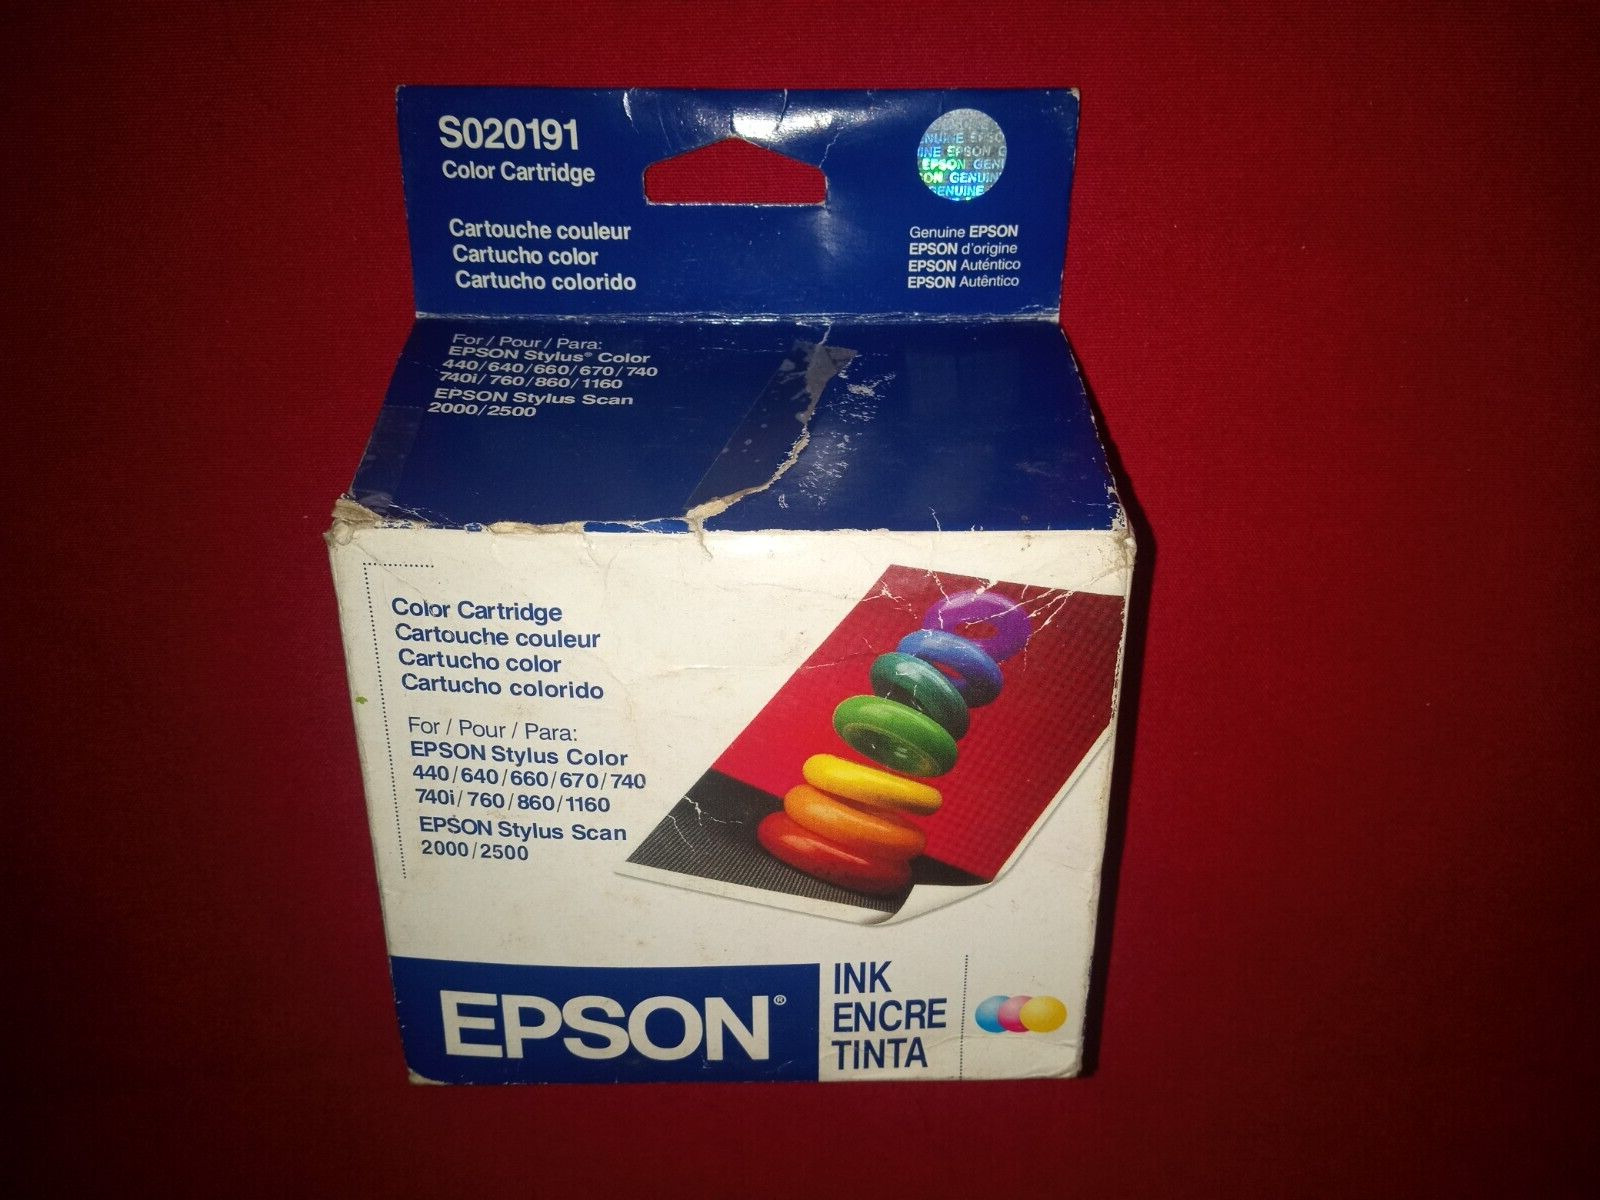 Genuine Epson Stylus S020191 Color Ink Cartridge EXPIRED 10/2004 READ ALL INFO